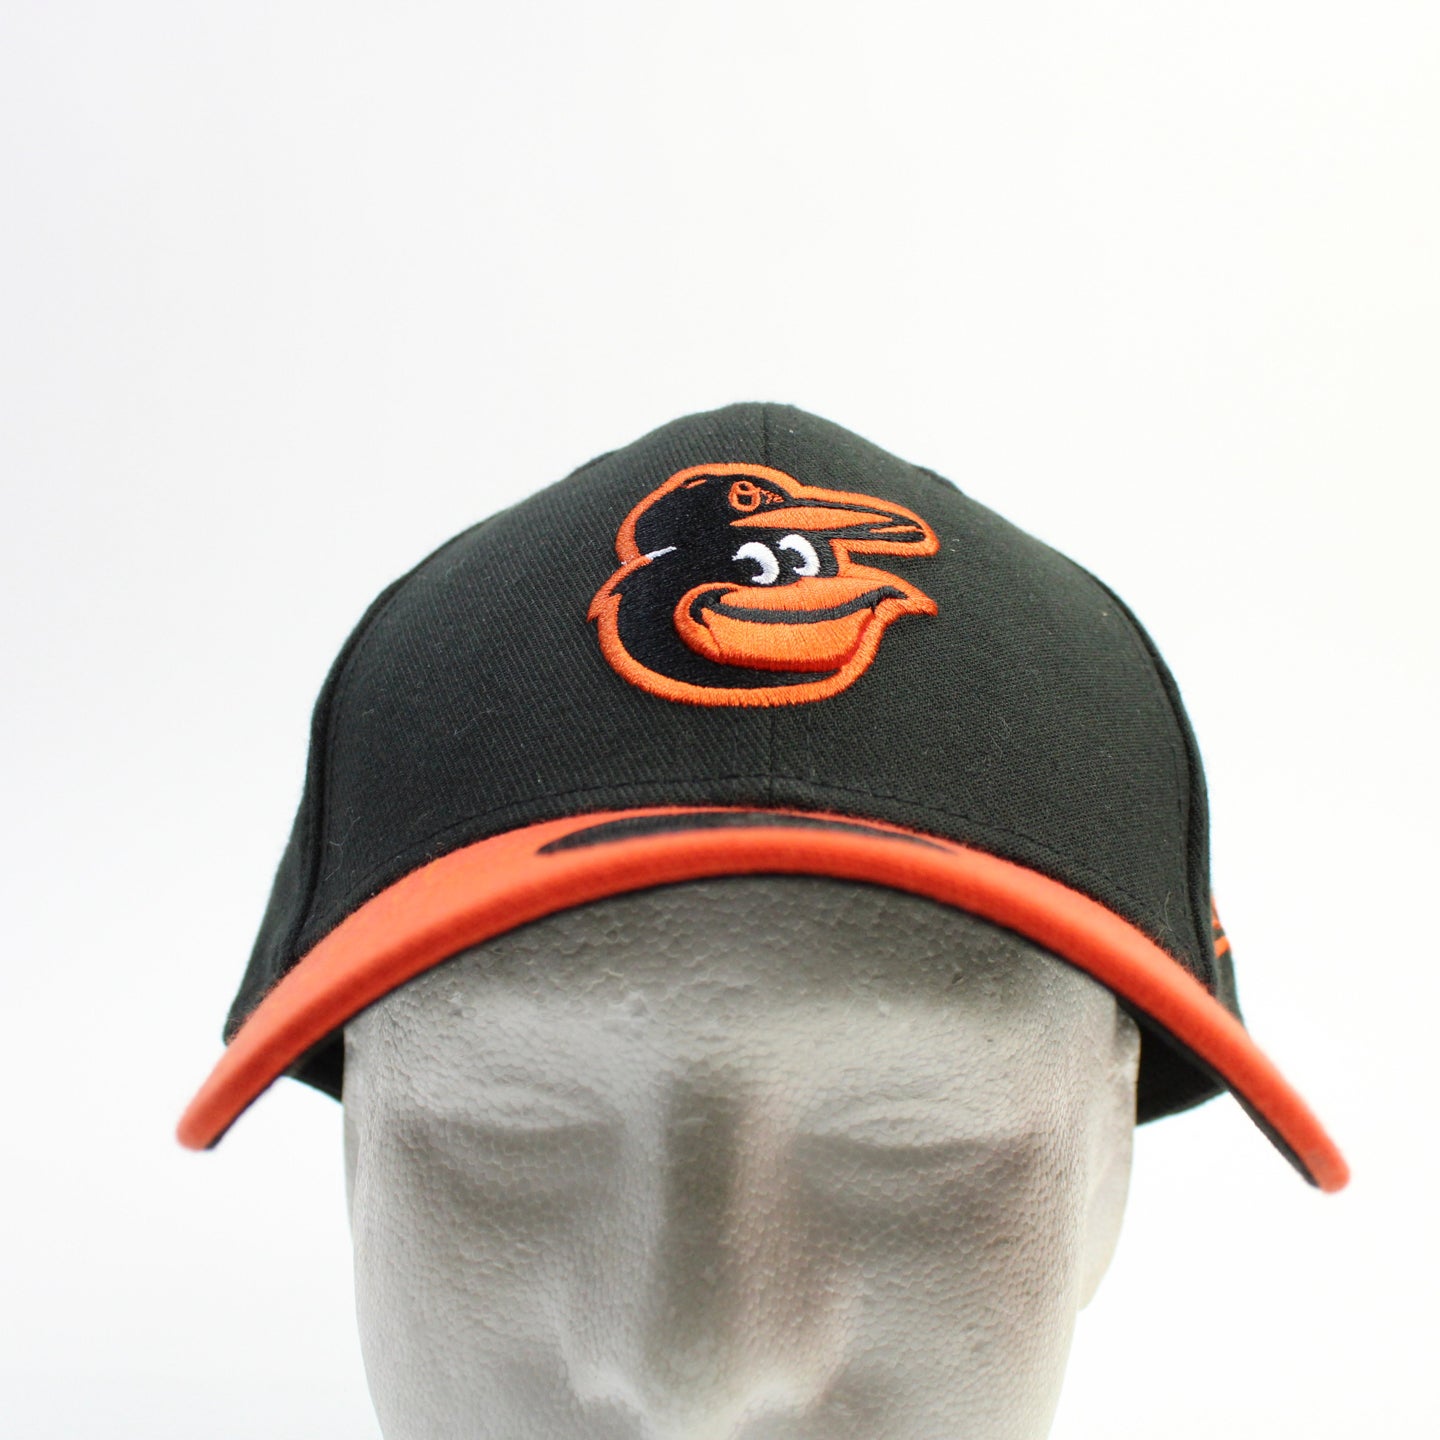 Baltimore Orioles New Era Fitted Hat Unisex White/Black New with